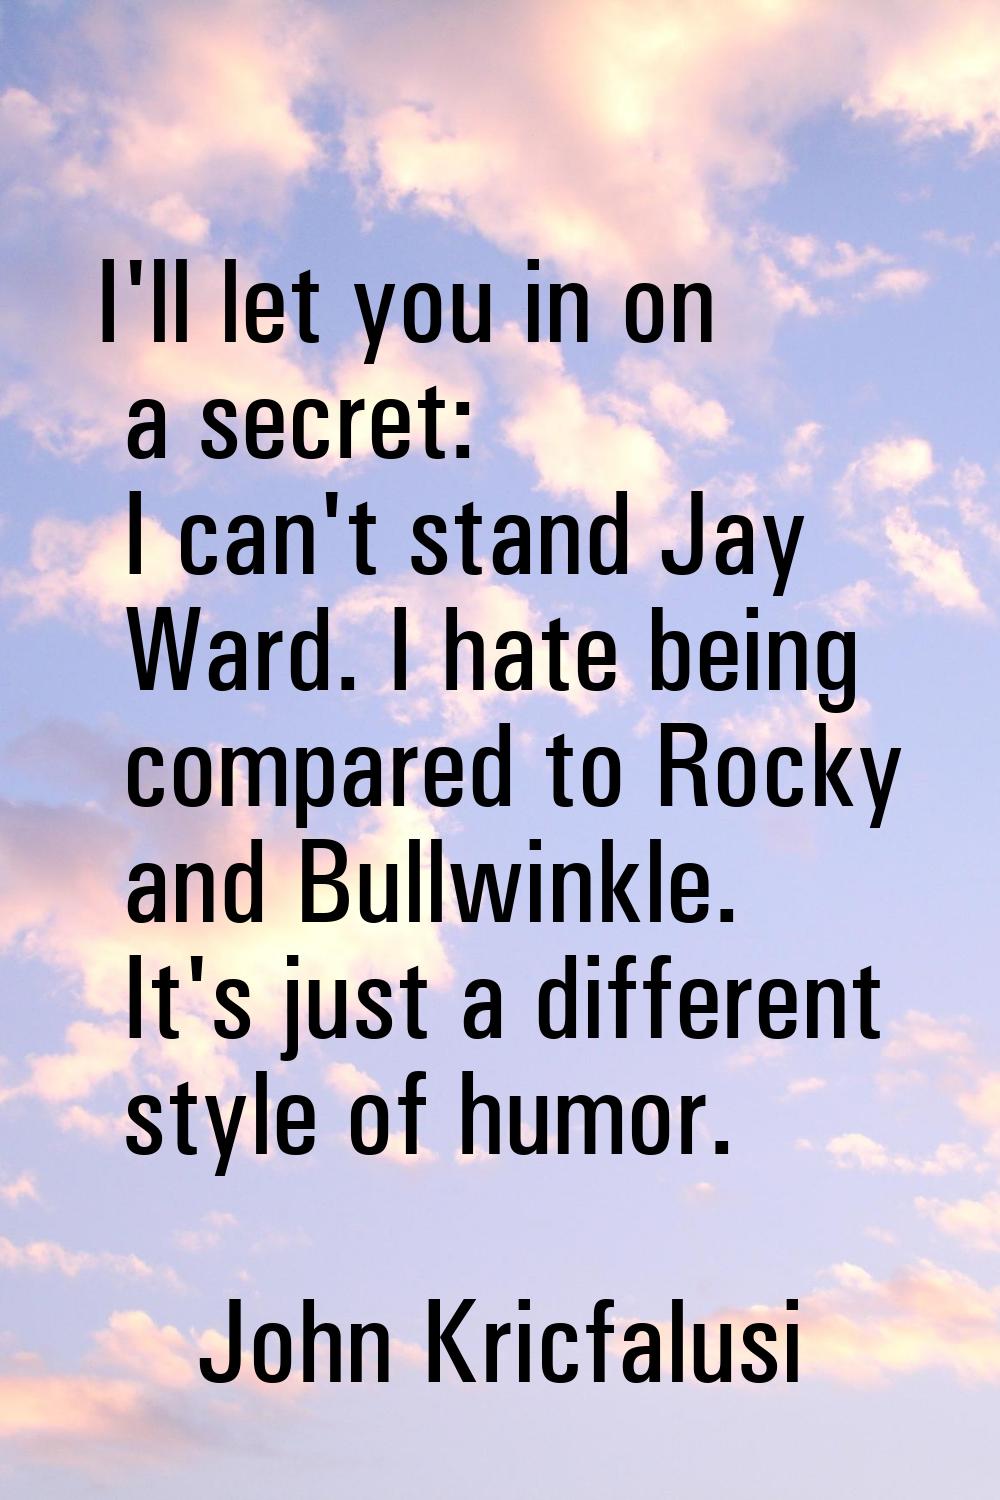 I'll let you in on a secret: I can't stand Jay Ward. I hate being compared to Rocky and Bullwinkle.